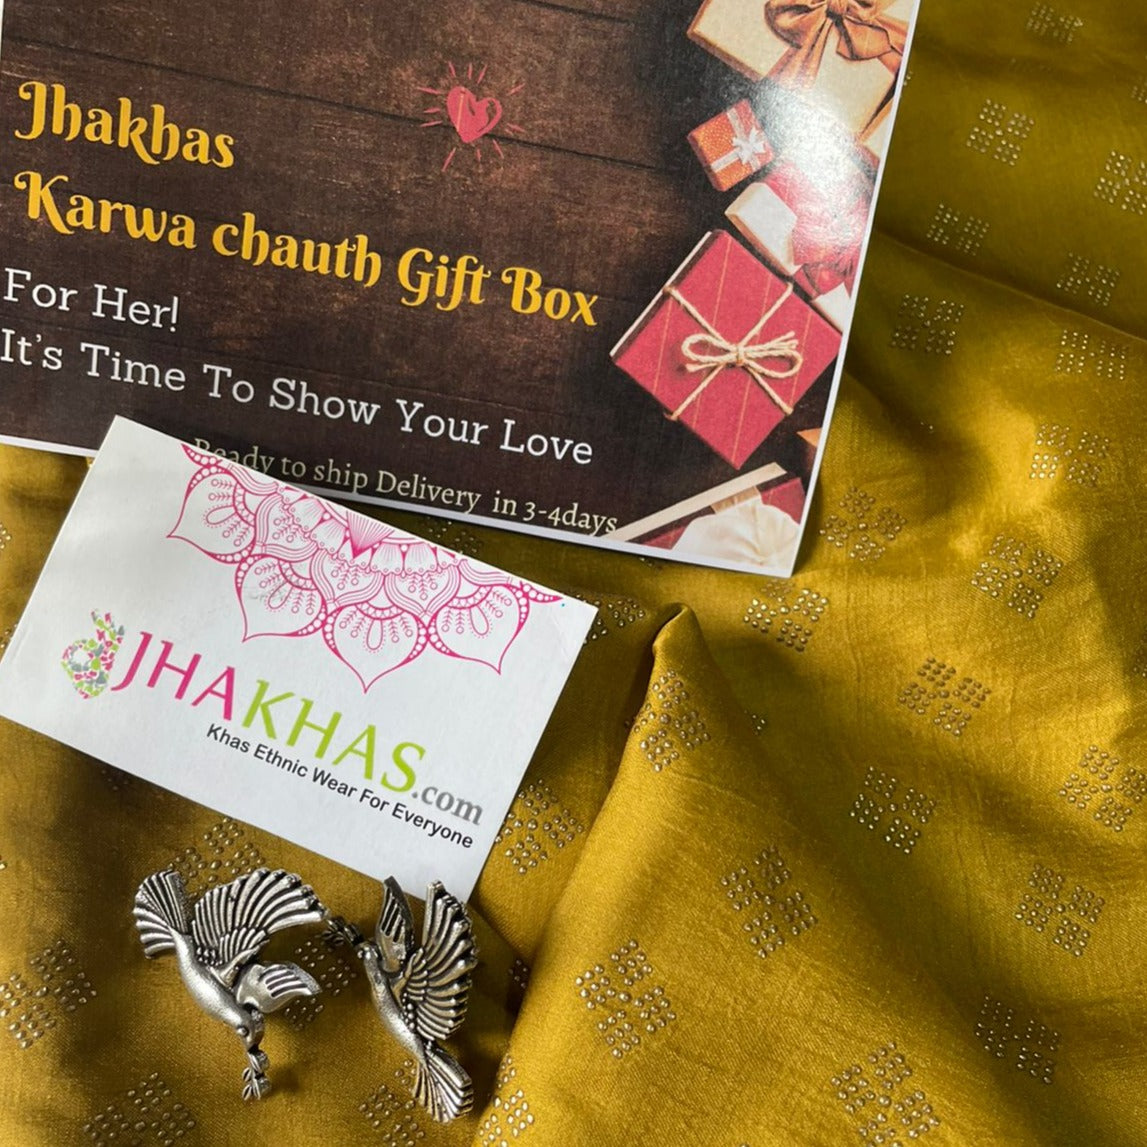 Karwa Chauth Gift Box for loved ones